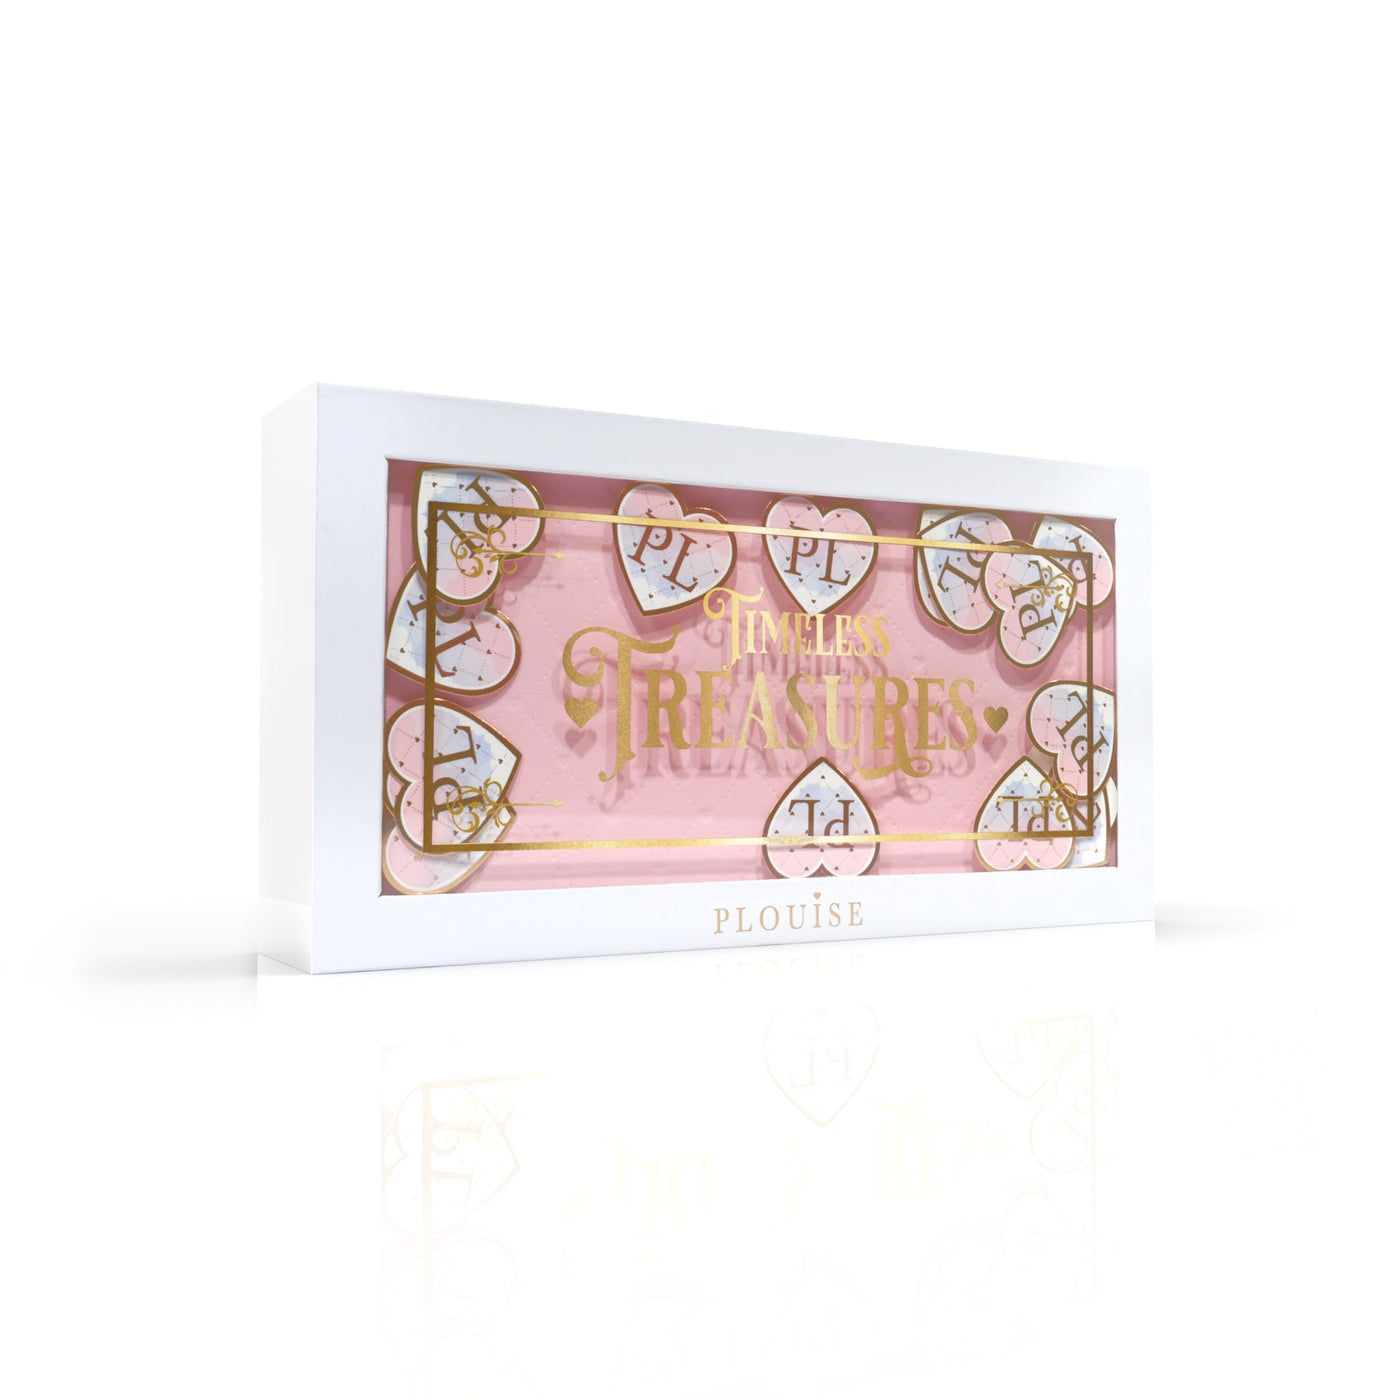 P.Louise - Timeless Treasures Palette